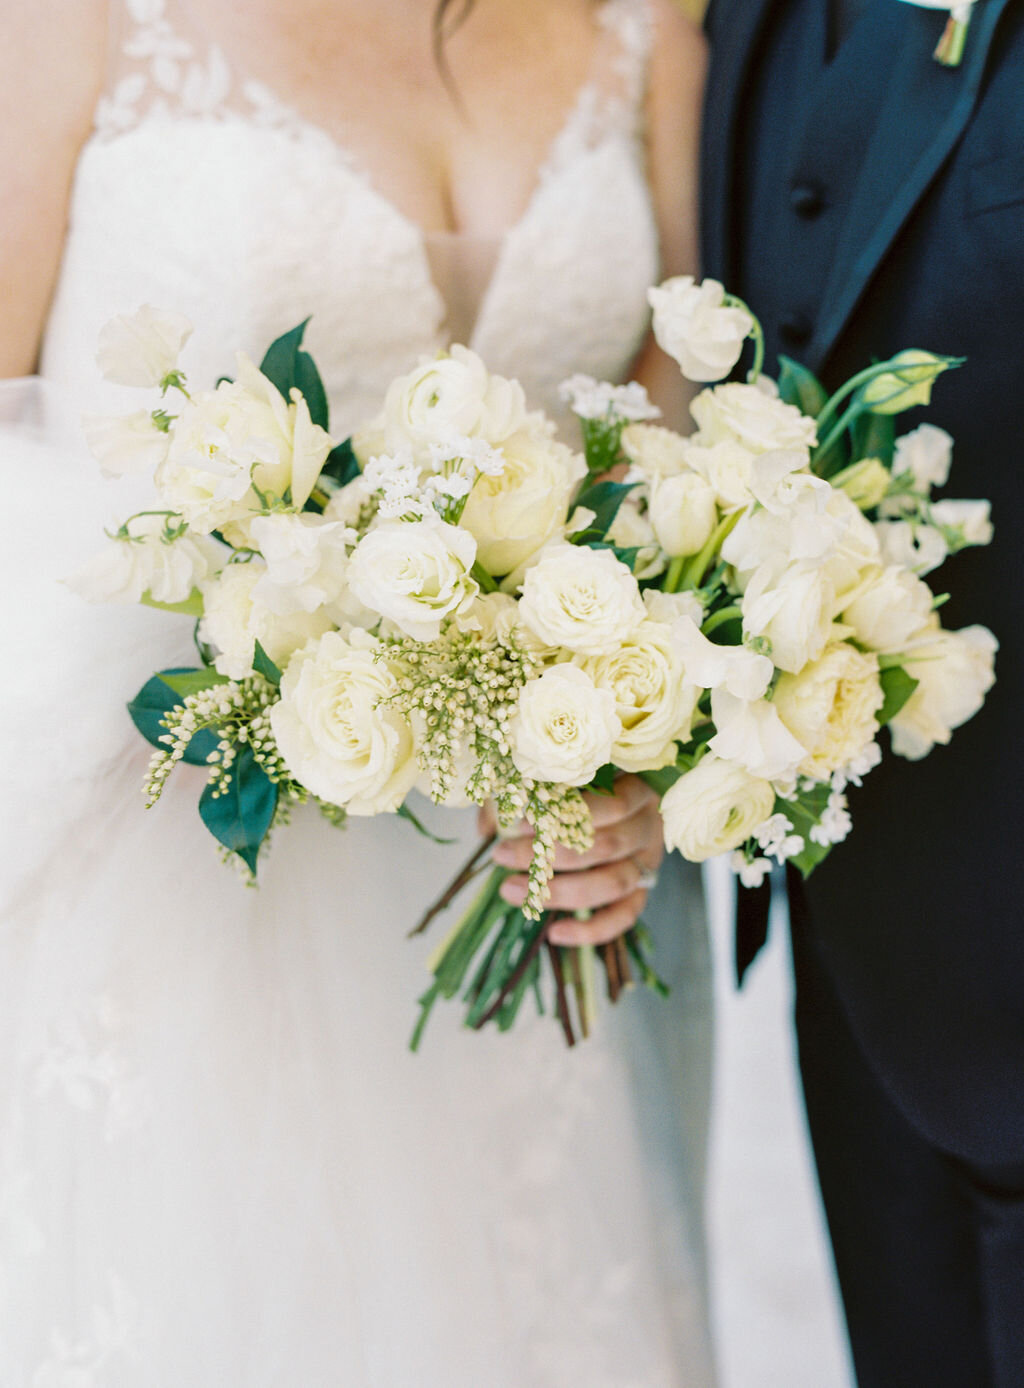 This wintery bridal bouquet is filled with white ice roses, fluffy ranunculus, draping pieris, majolica spray roses, white sweet pea, ivory lisianthus, and patience garden rose. Designed by florist Rosemary & Finch in Nashville, TN.